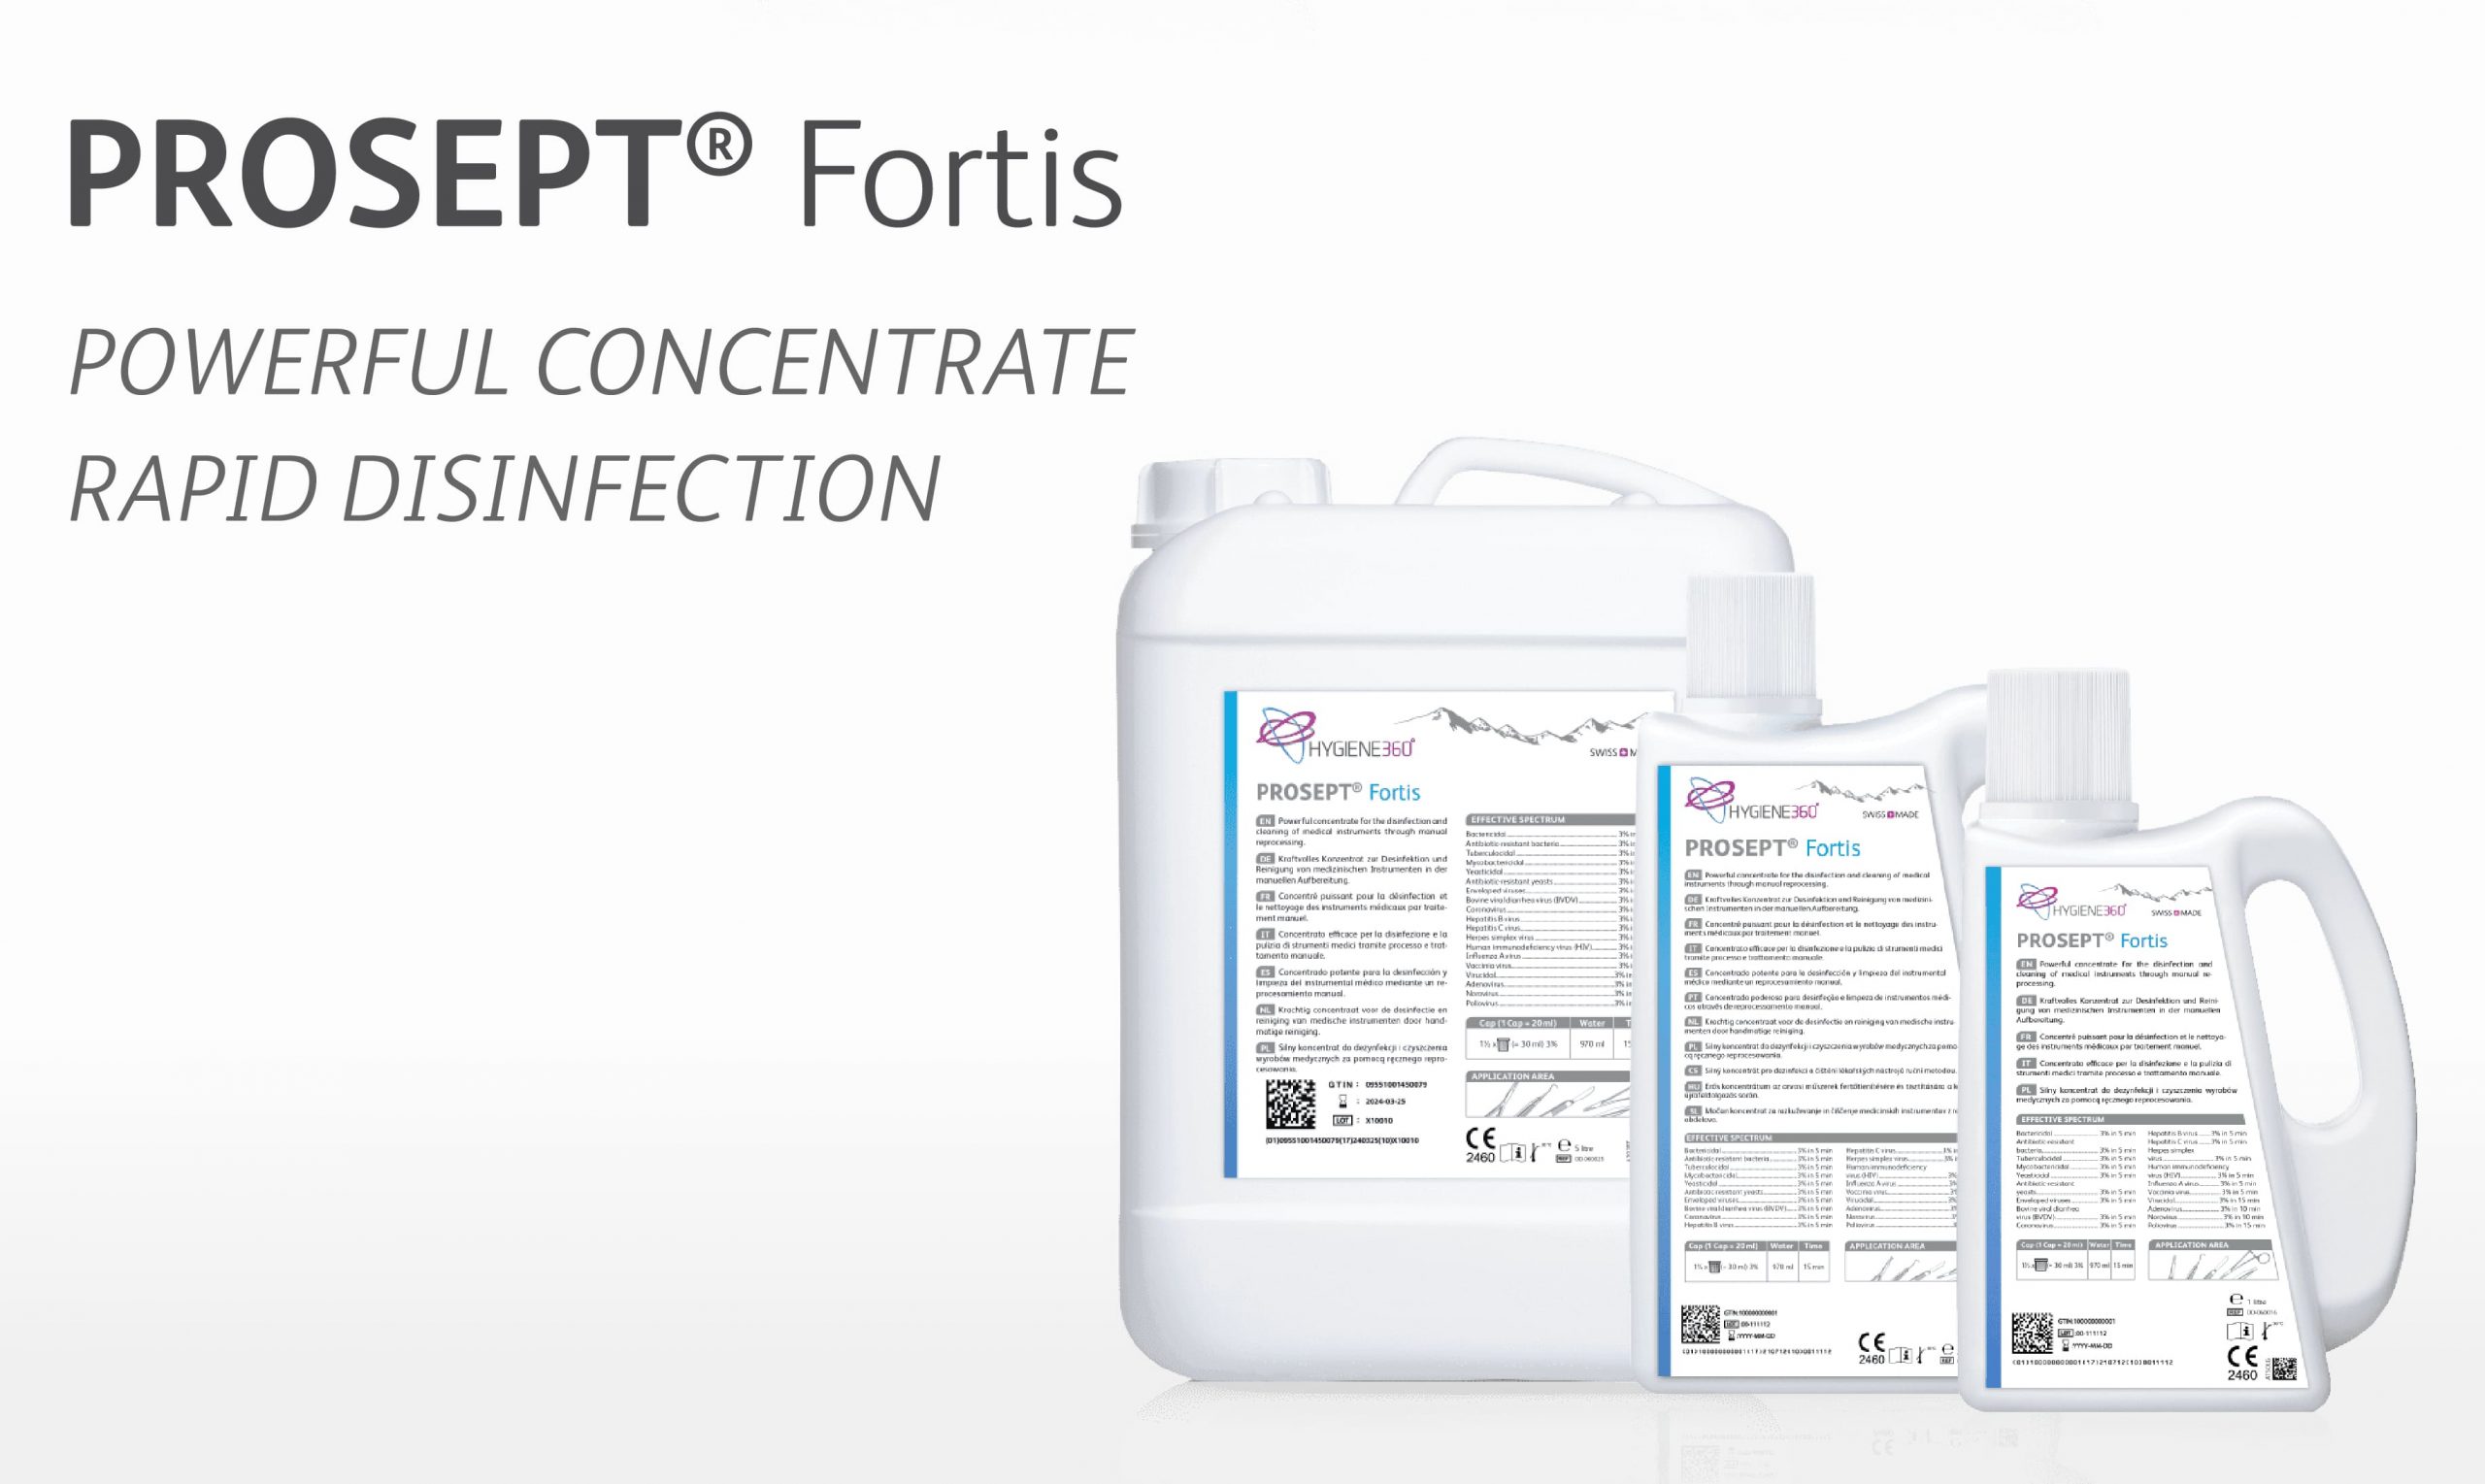 prosept-fortis-powerful-disinfectants-concentrate